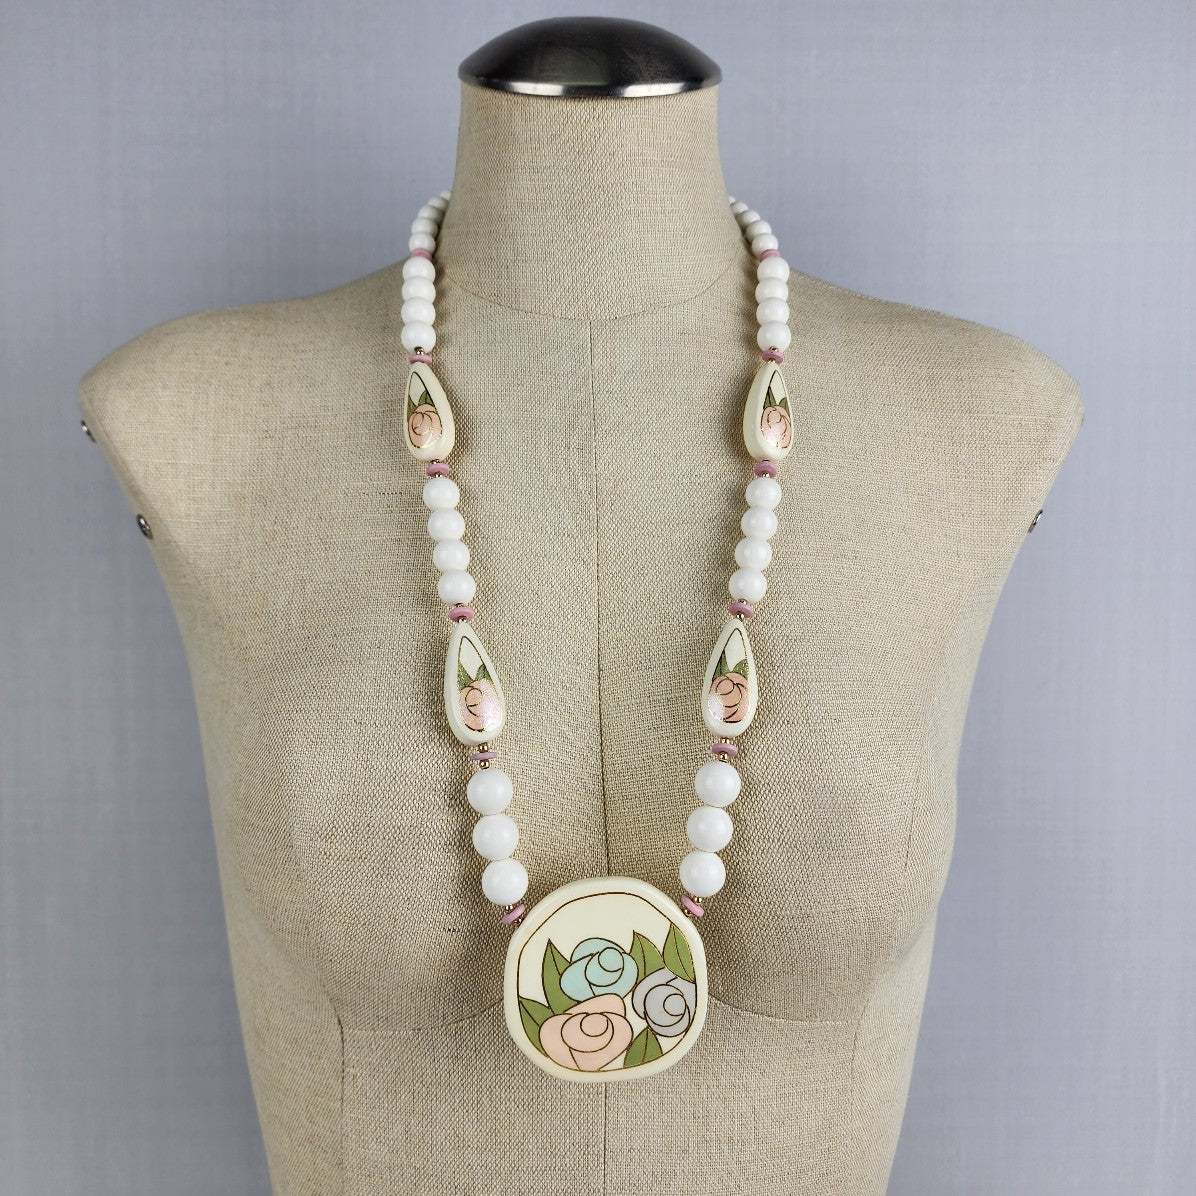 Vintage Japan Ceramic White Beaded Necklace Hand Painted Floral Necklace